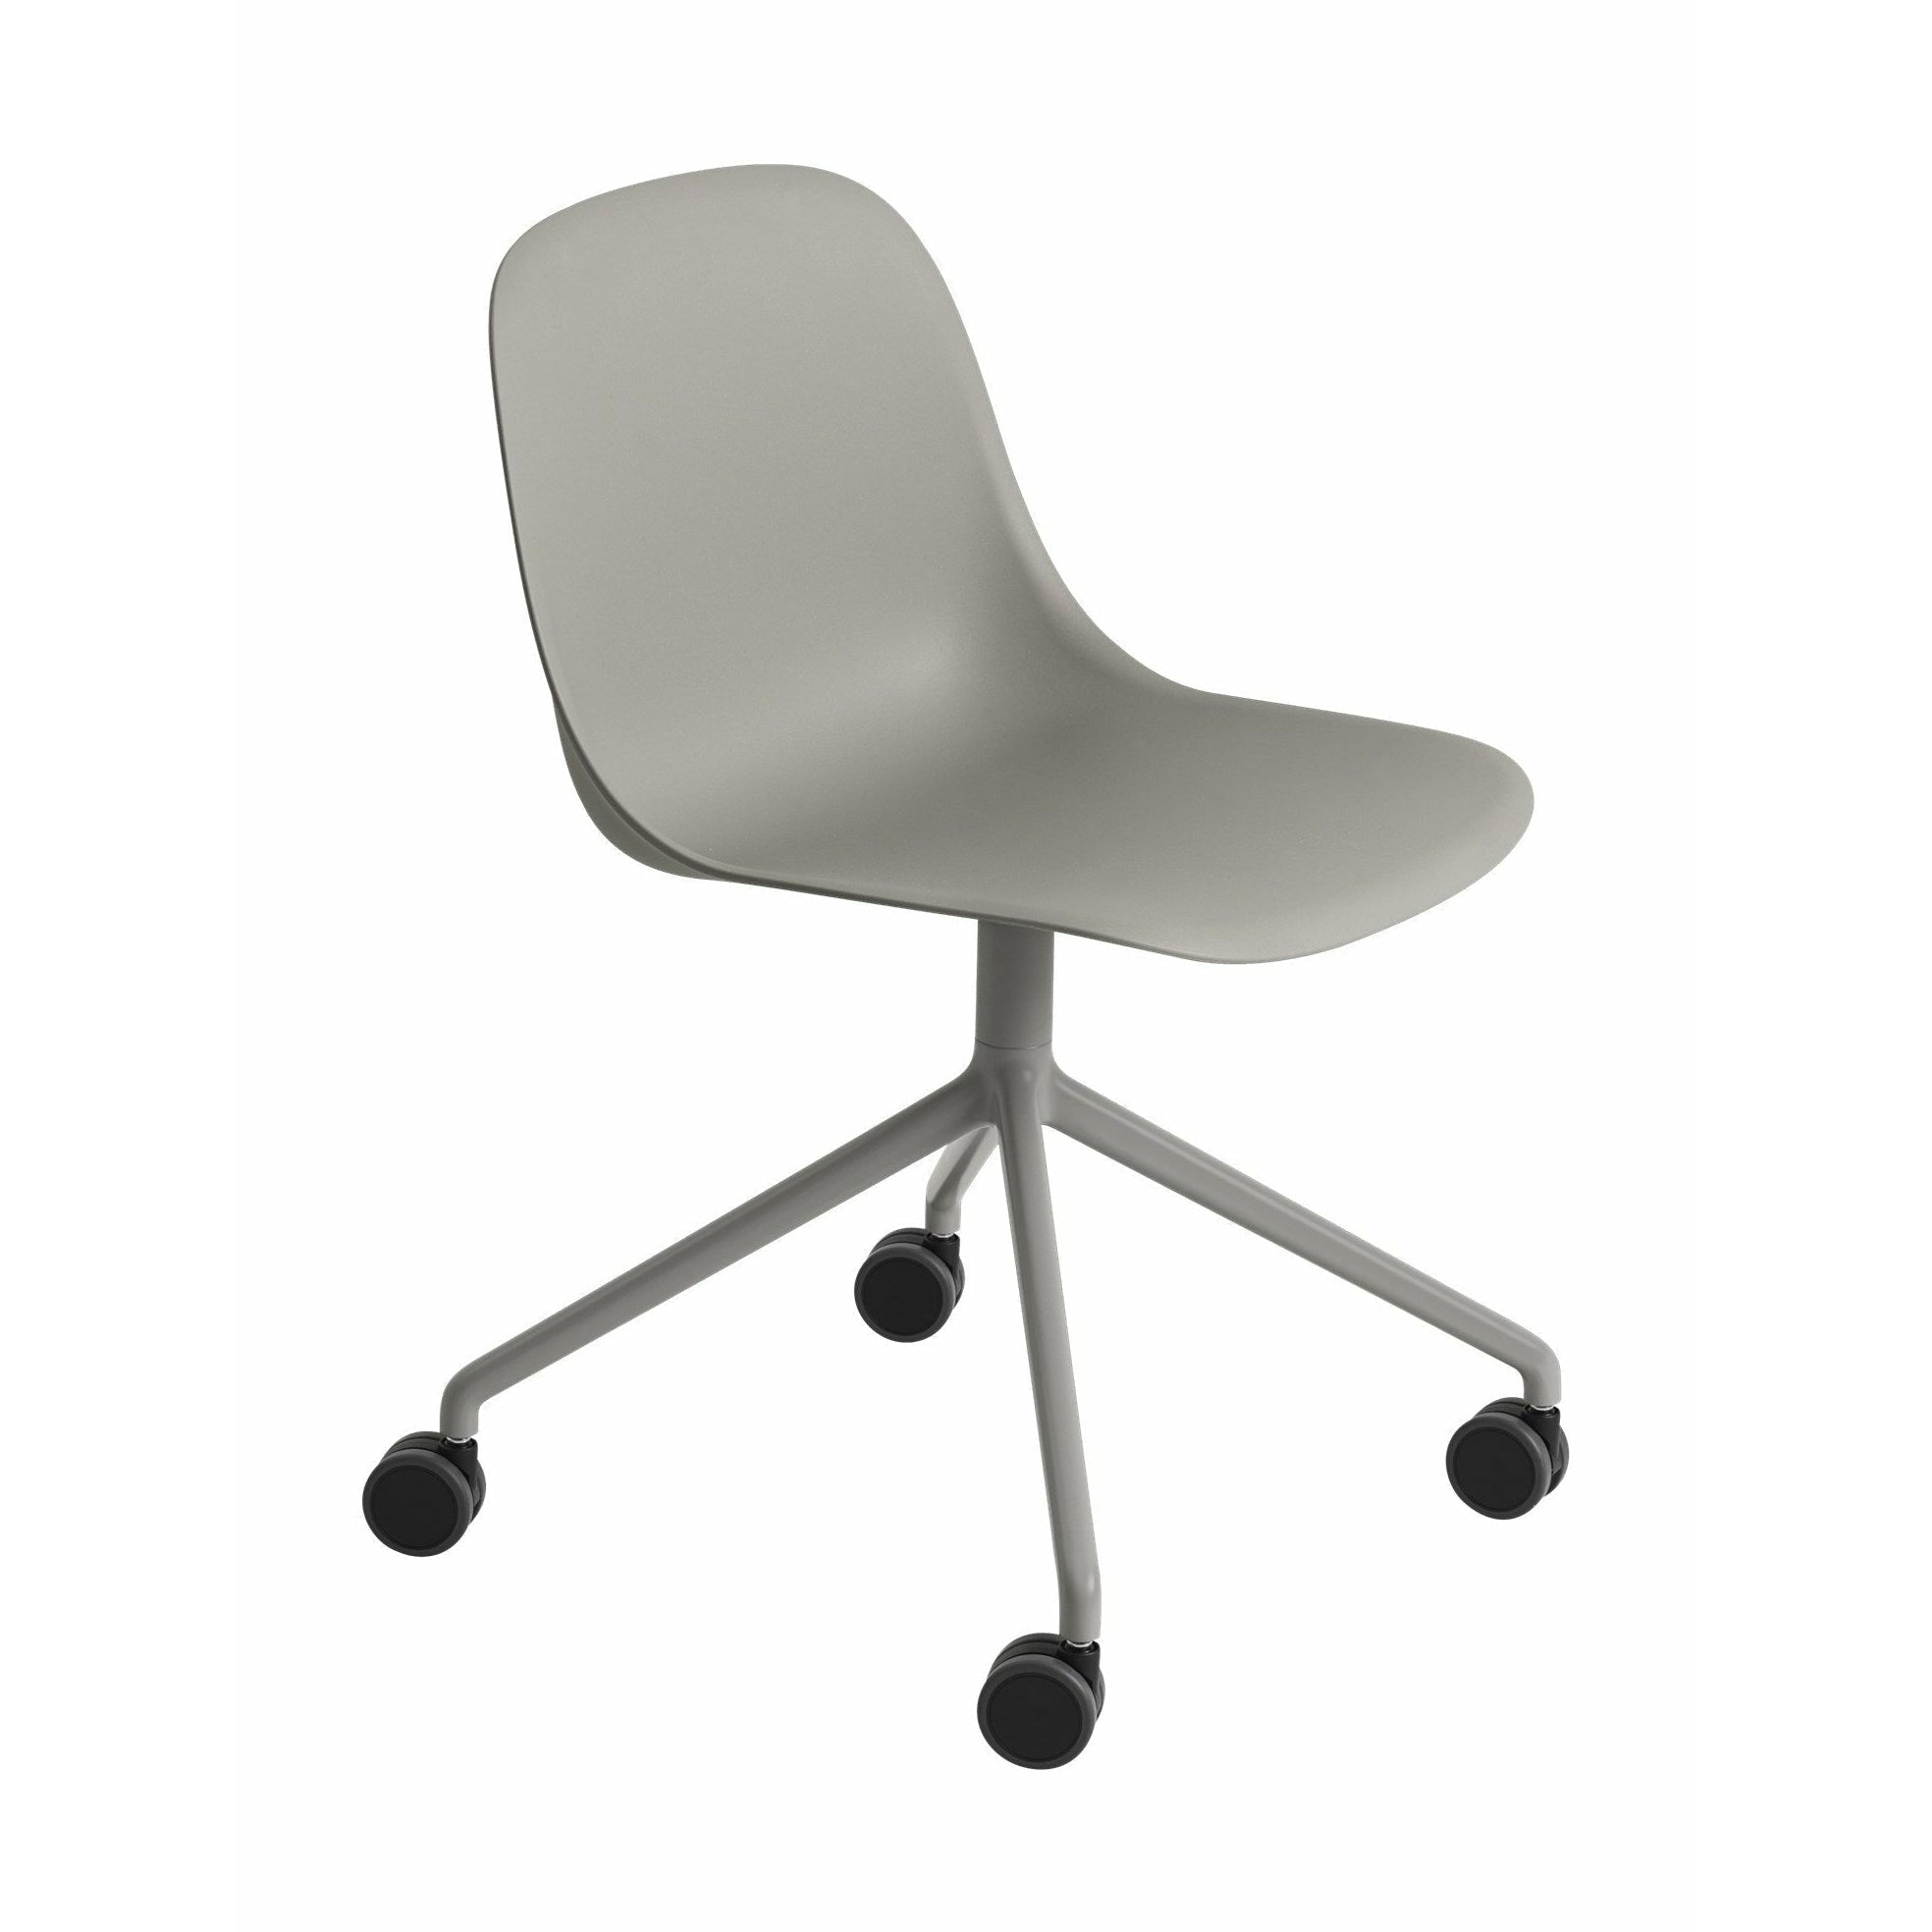 Muuto Fiber Side Chair Made Of Recycled Plastic Swivel With Wheels, Grey/Grey